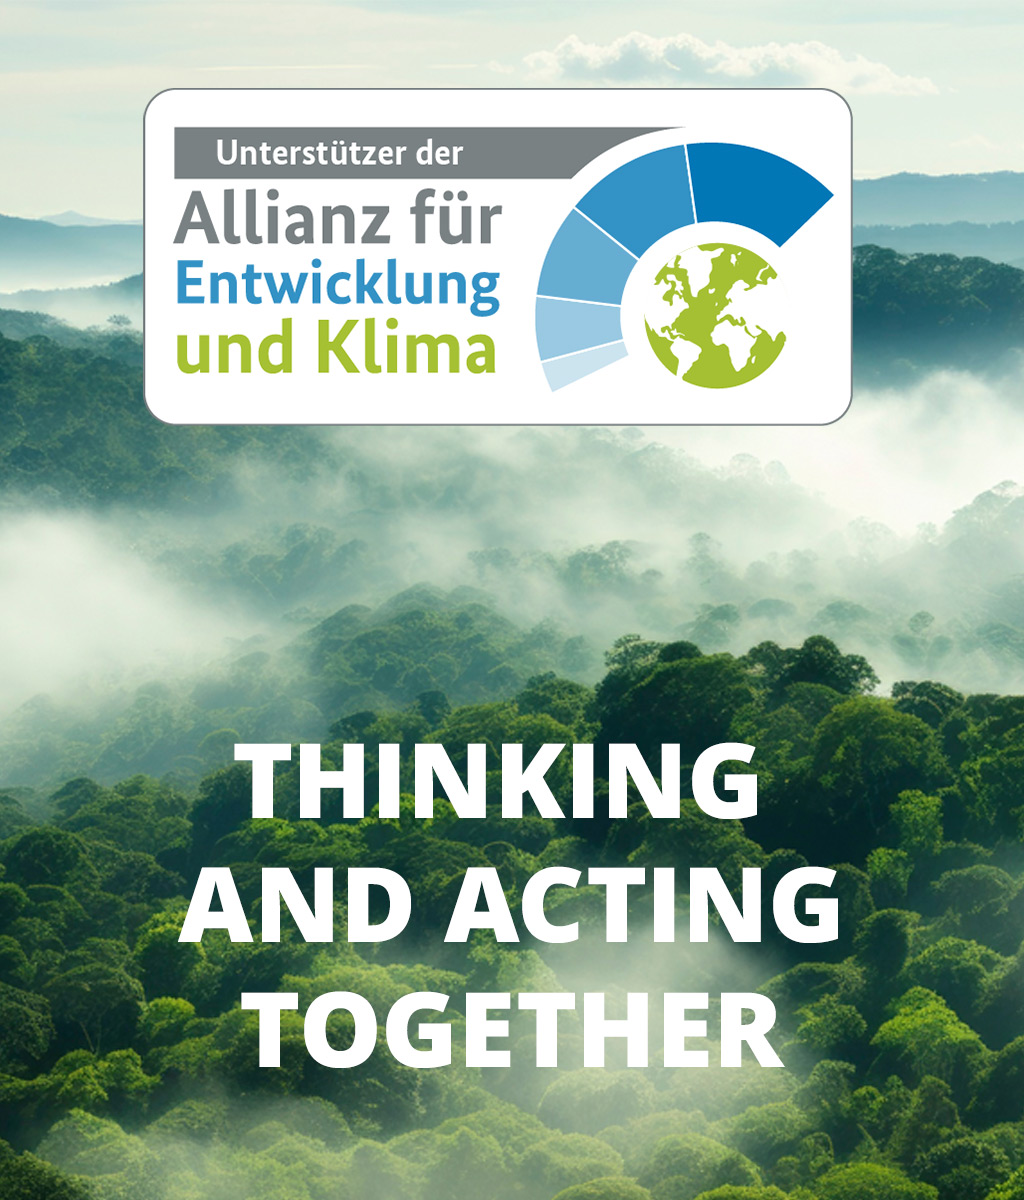 Alliance for Development and Climate 